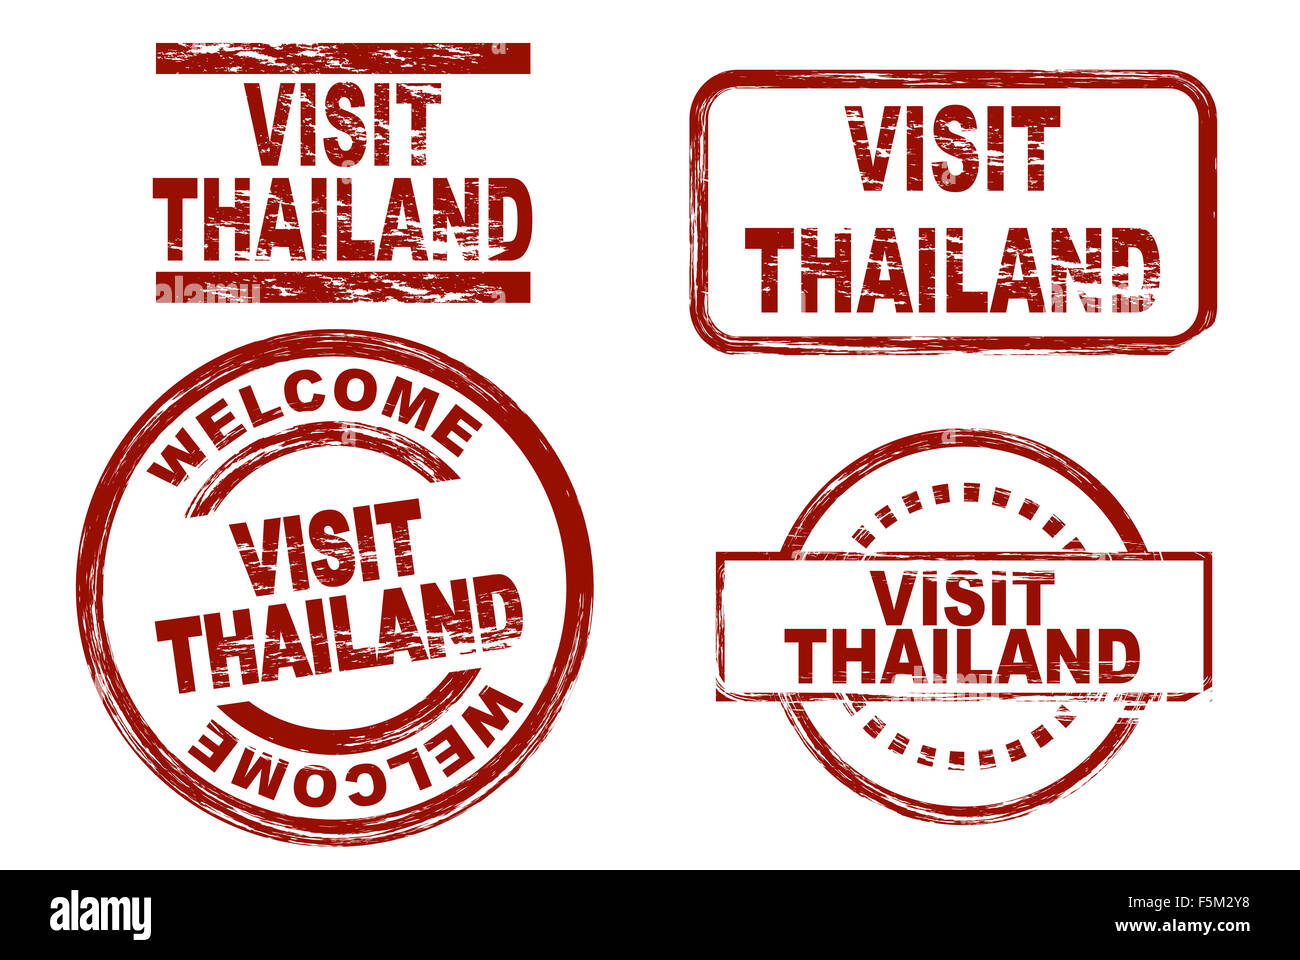 Set of stylized ink stamps showing the term visit thailand. All on white background. Stock Photo